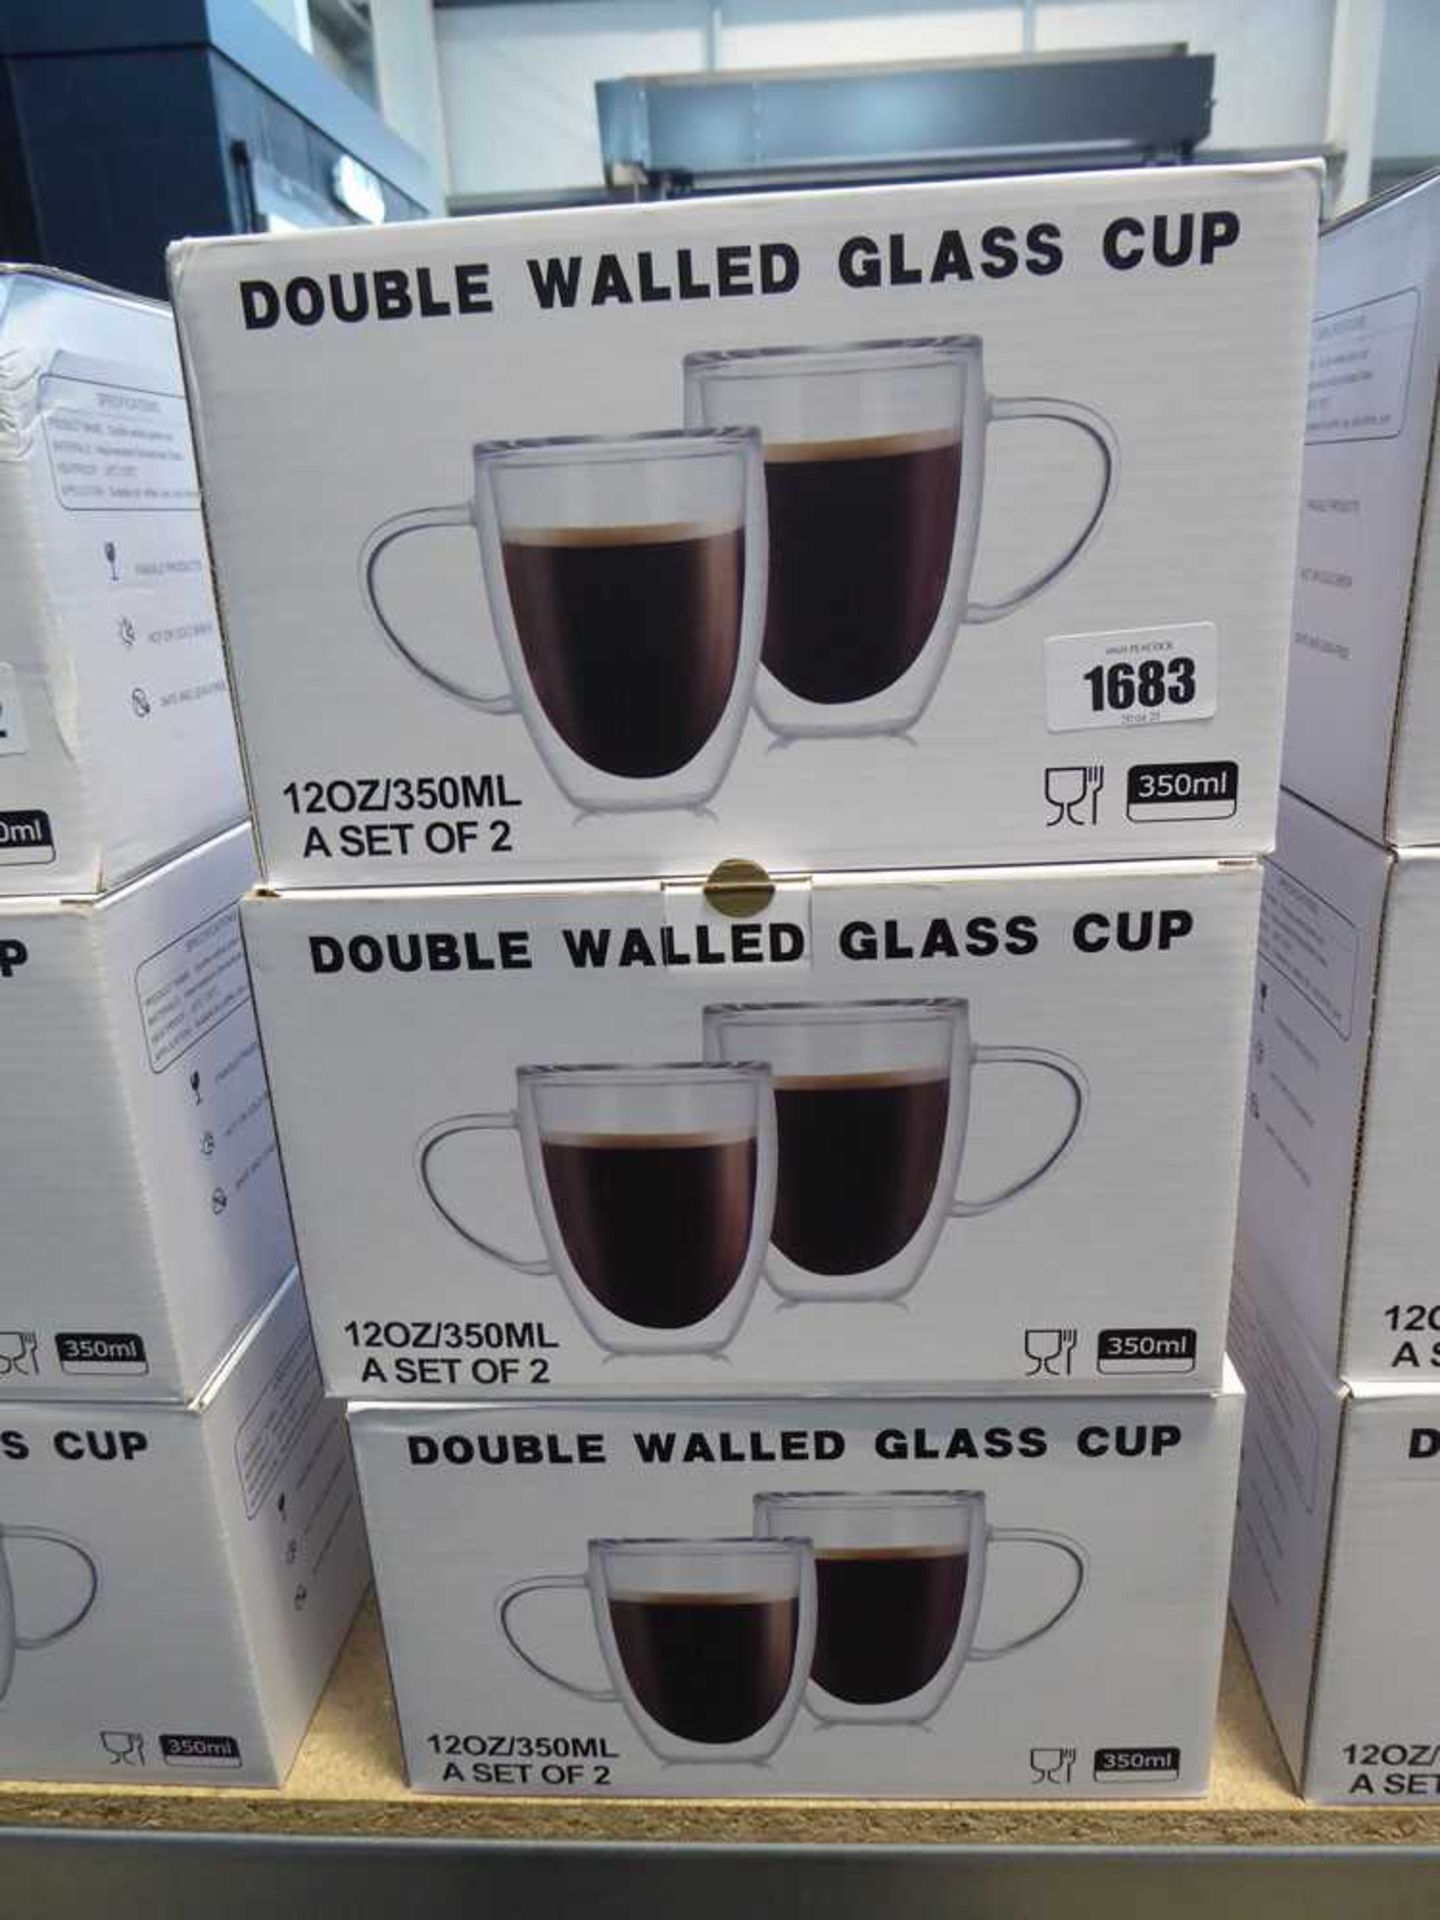 3 sets of 2 double walled glass cups